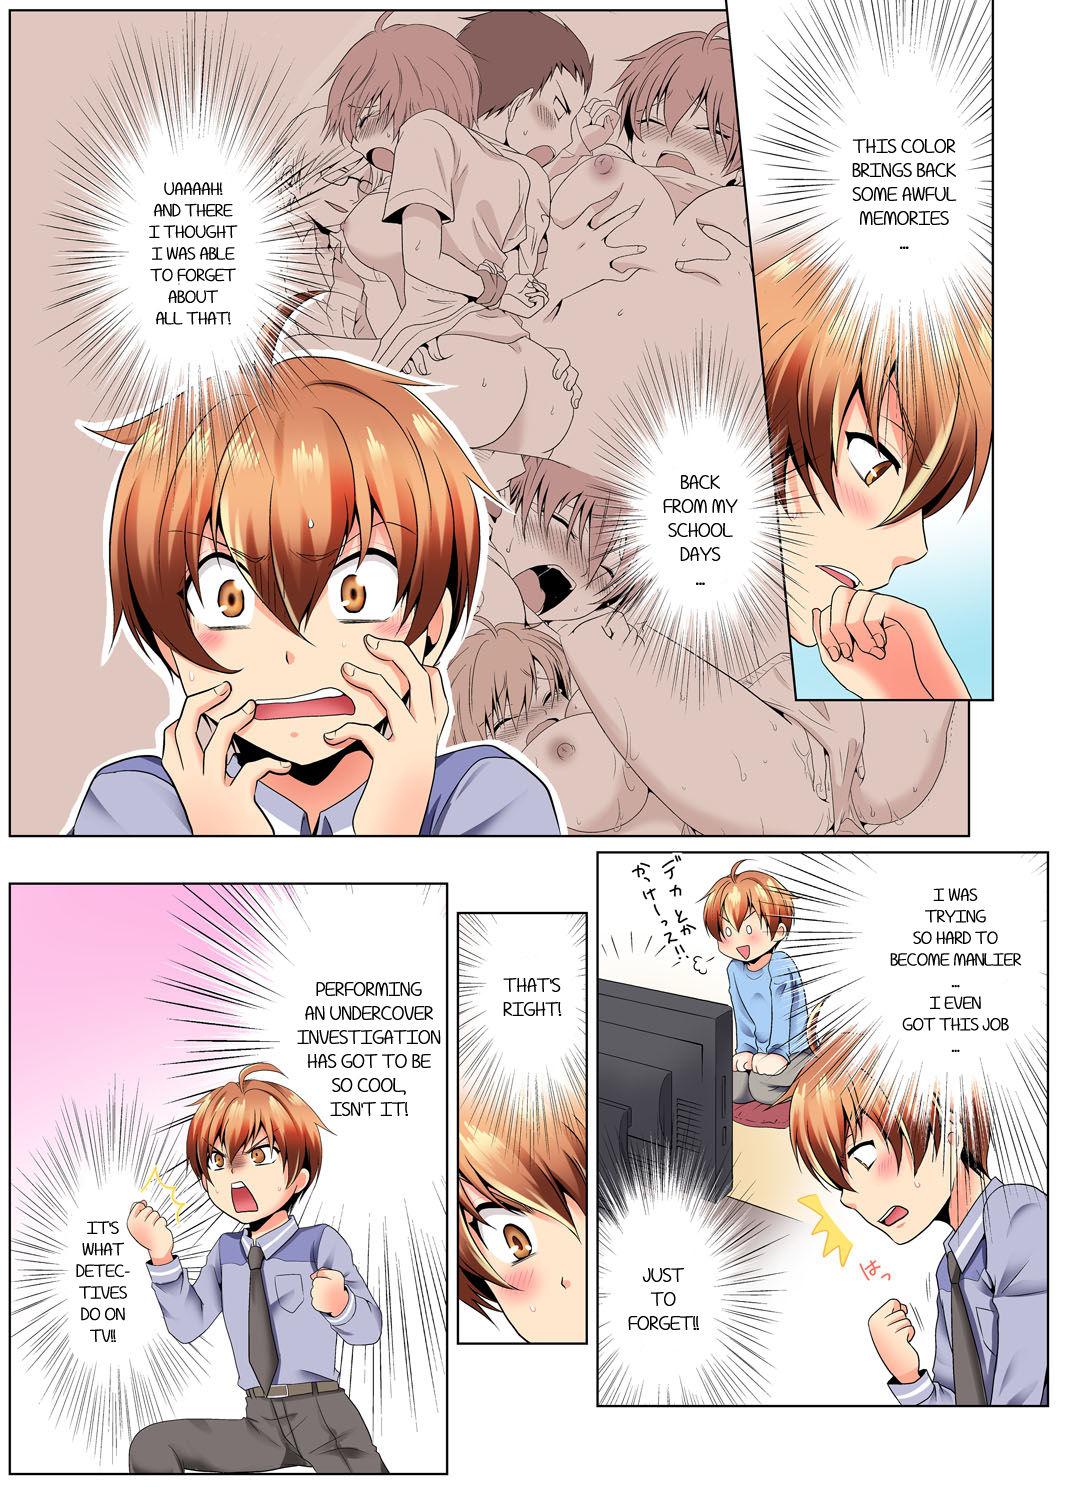 Class Room Sexy Undercover Investigation! Don't spread it too much! Lewd TS Physical Examination Part 1 Shaved - Page 10